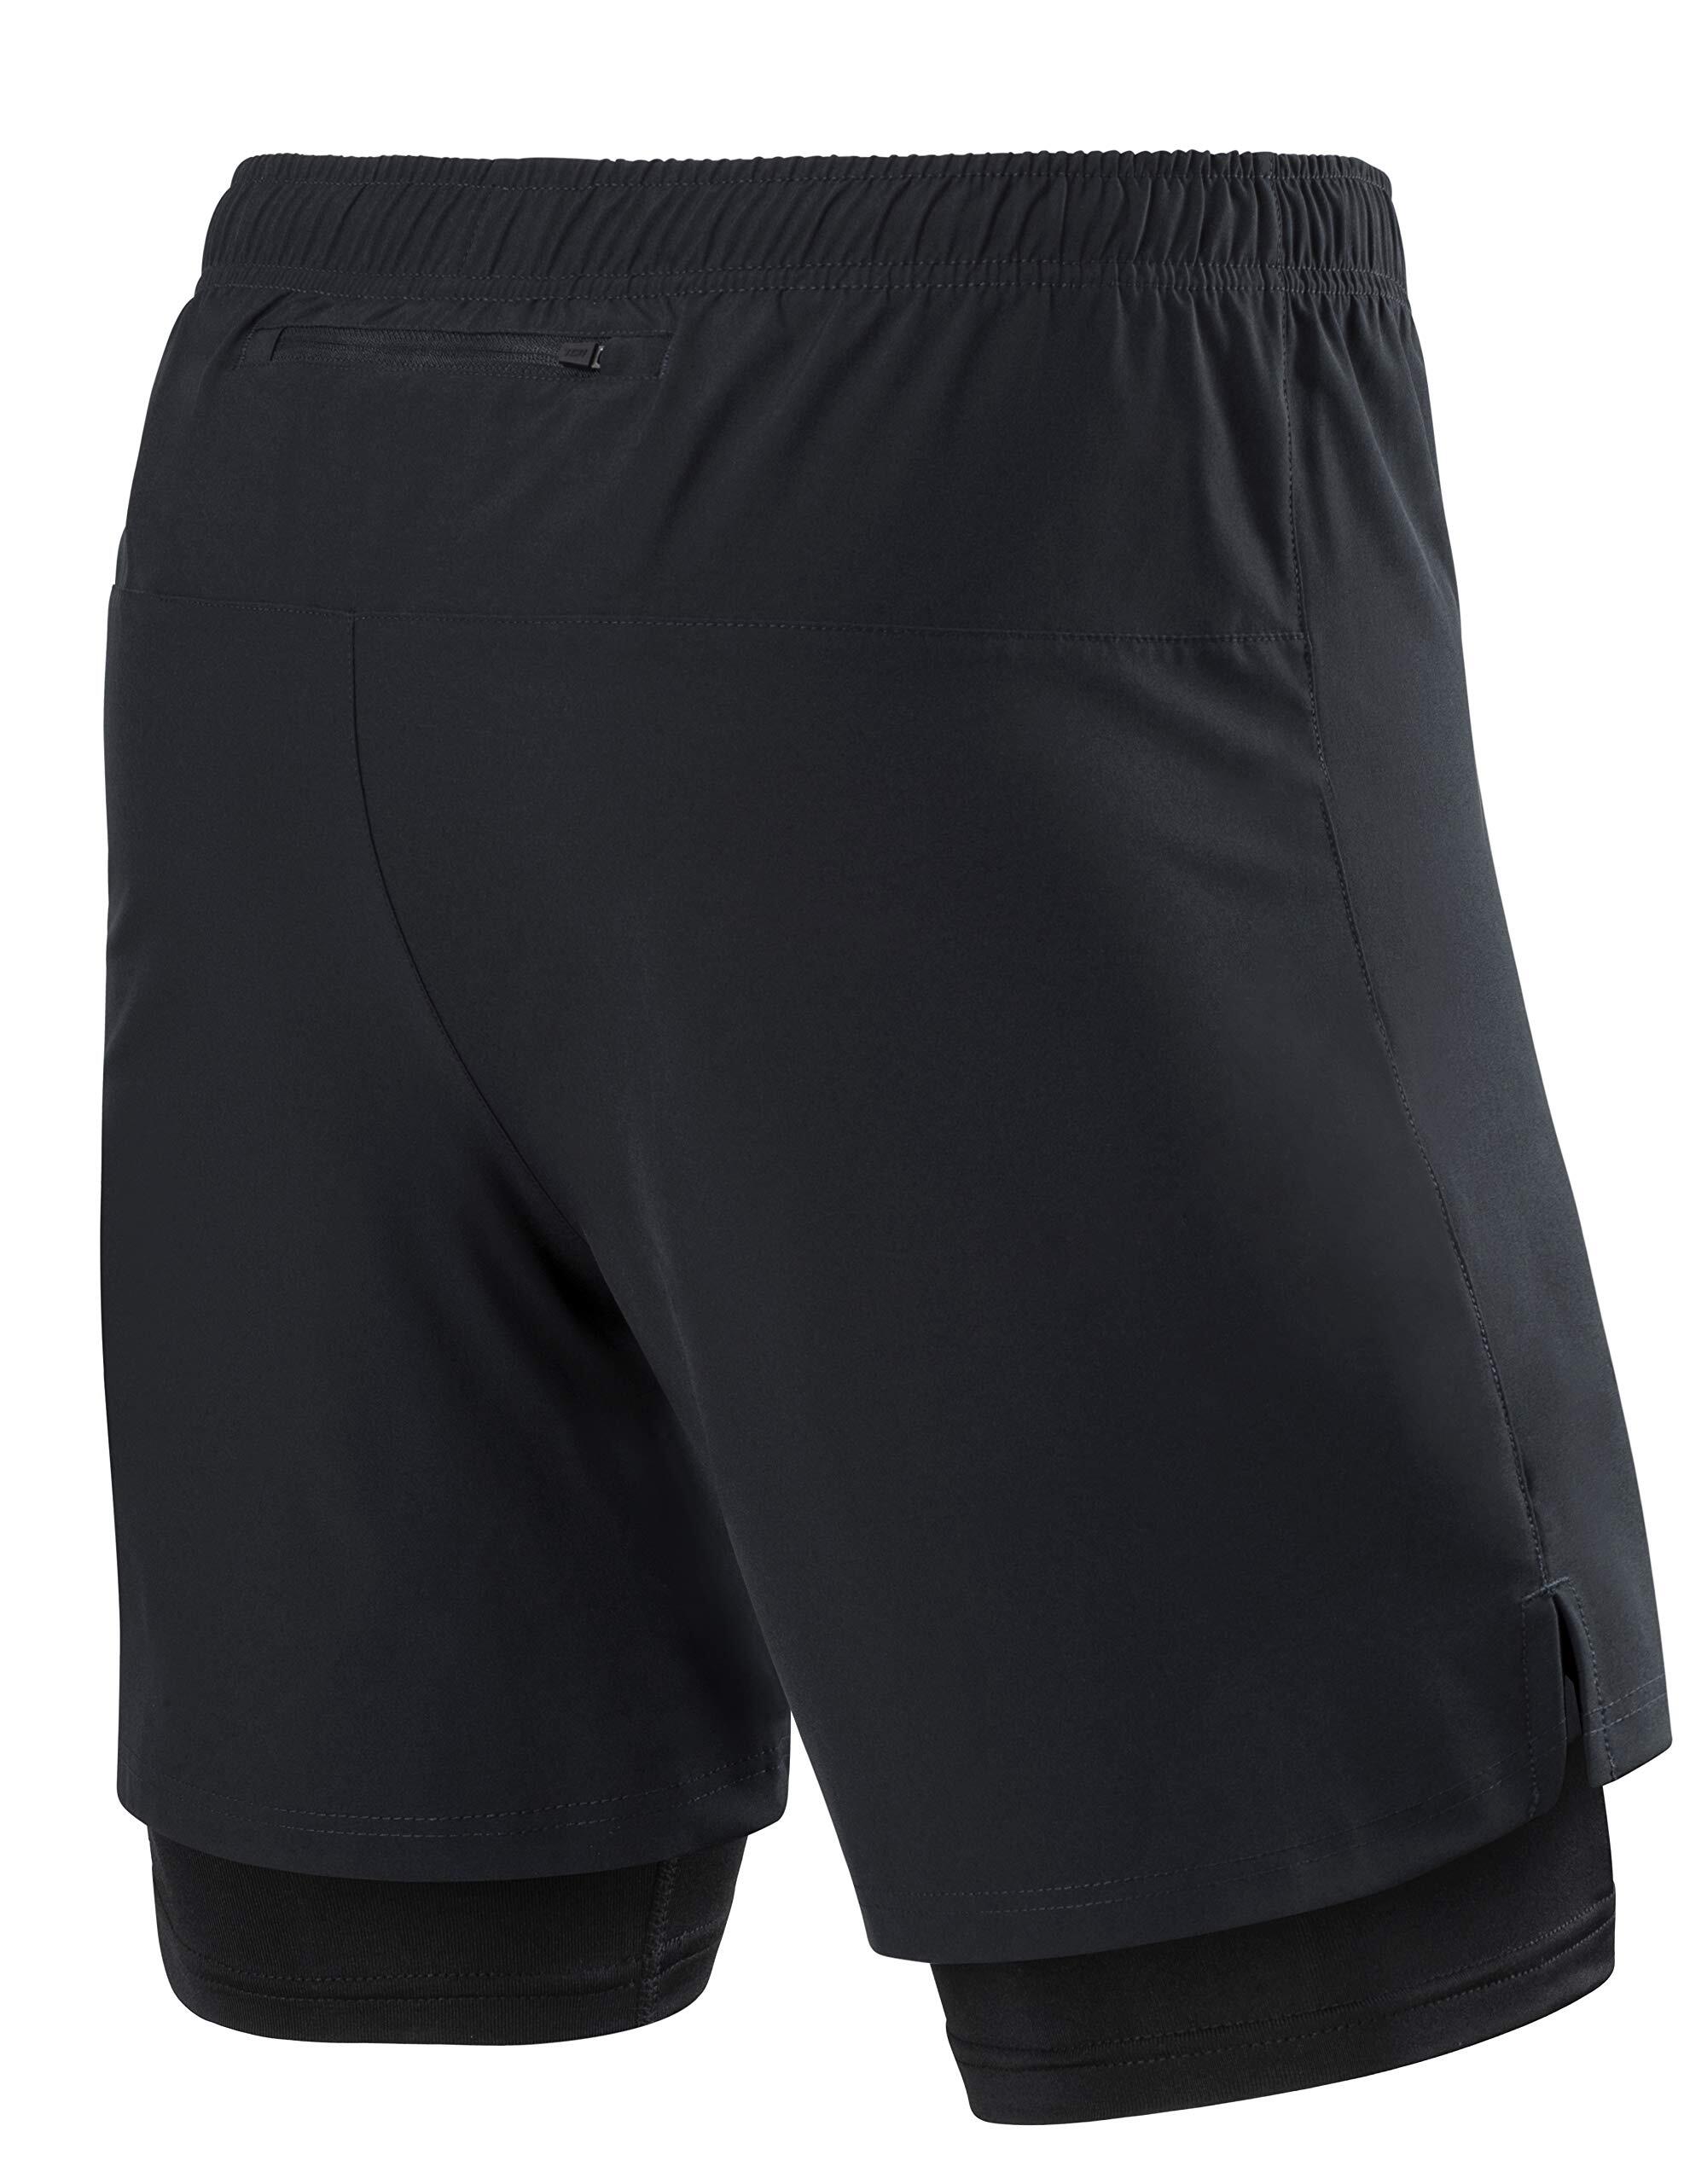 Men's Ultra 2-in-1 Running Shorts with Key Pocket - Anthracite 2/5